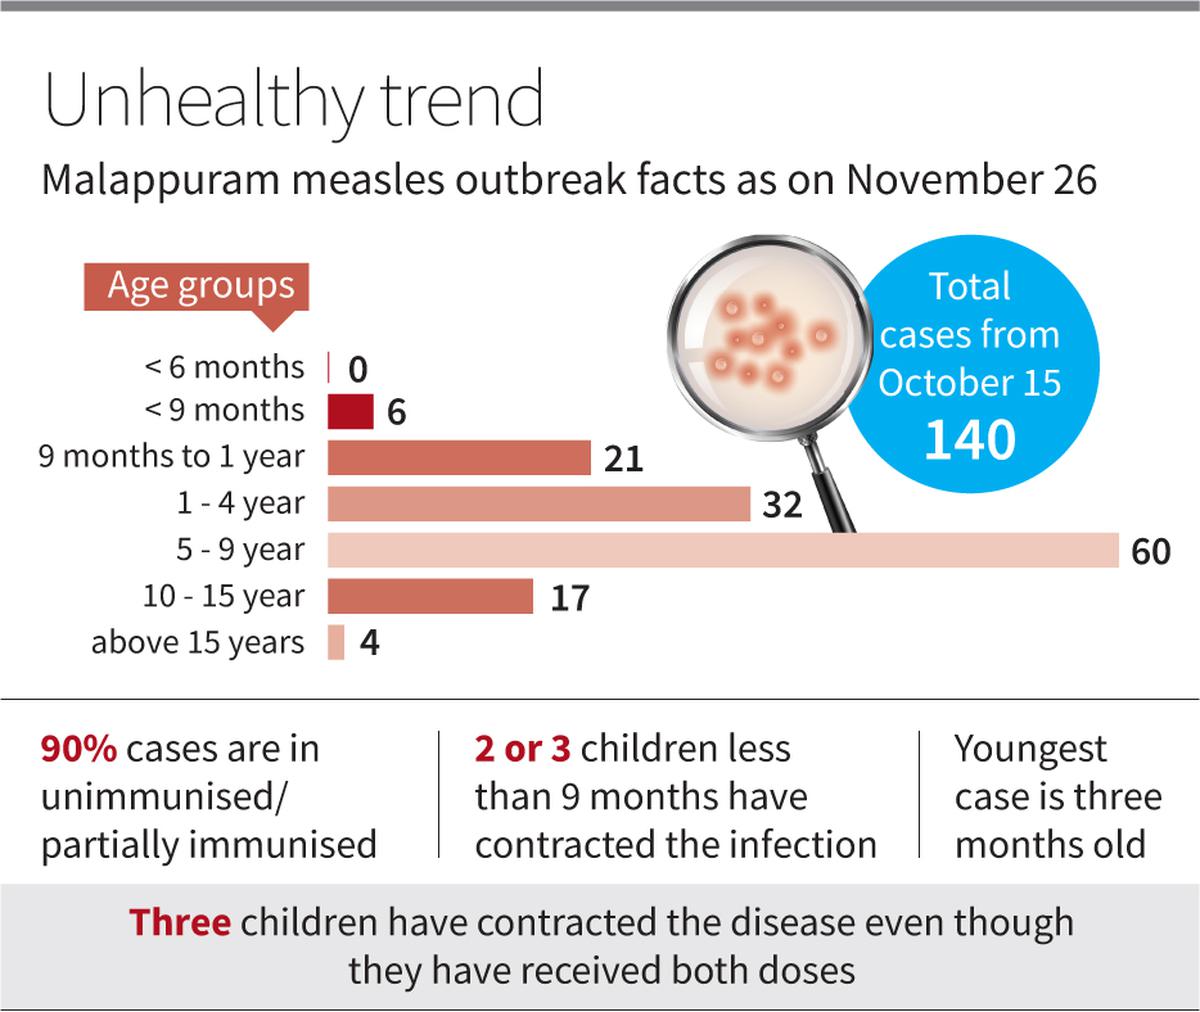 Fall in immunisation may have triggered measles outbreak